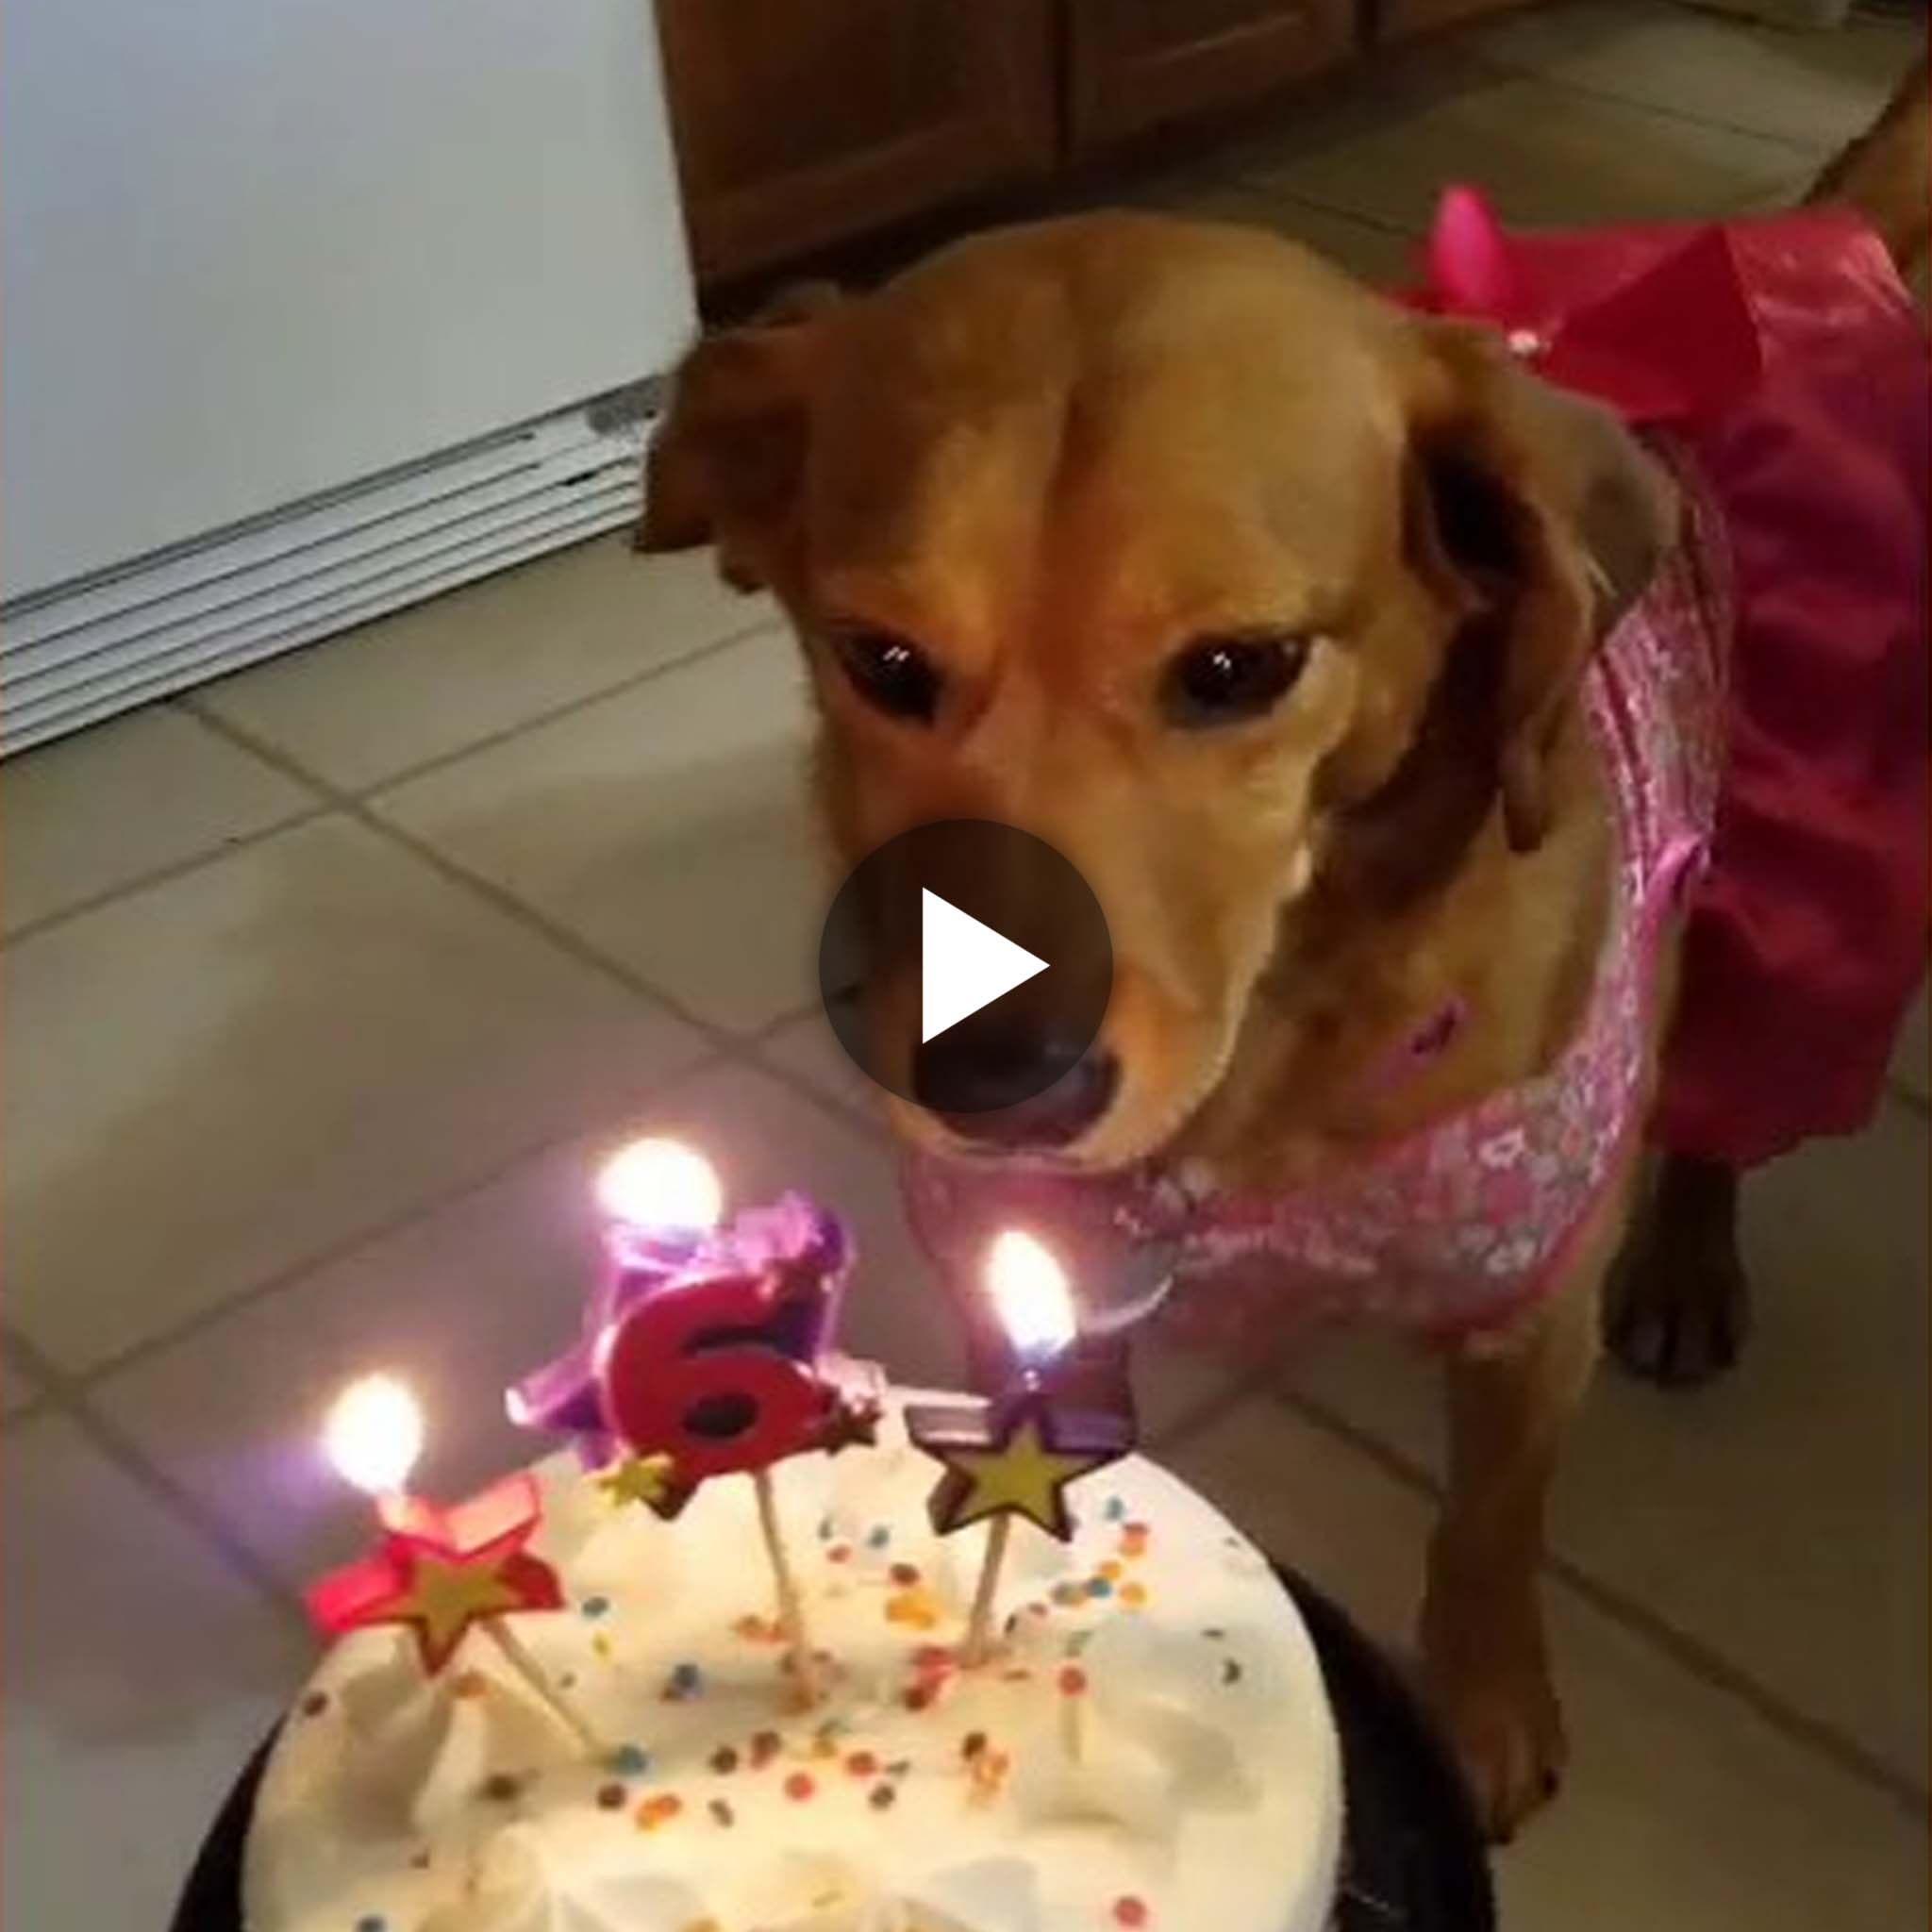 “Happy 6th Birthday, Ginger! Celebrate your birthday with love and gratitude.”